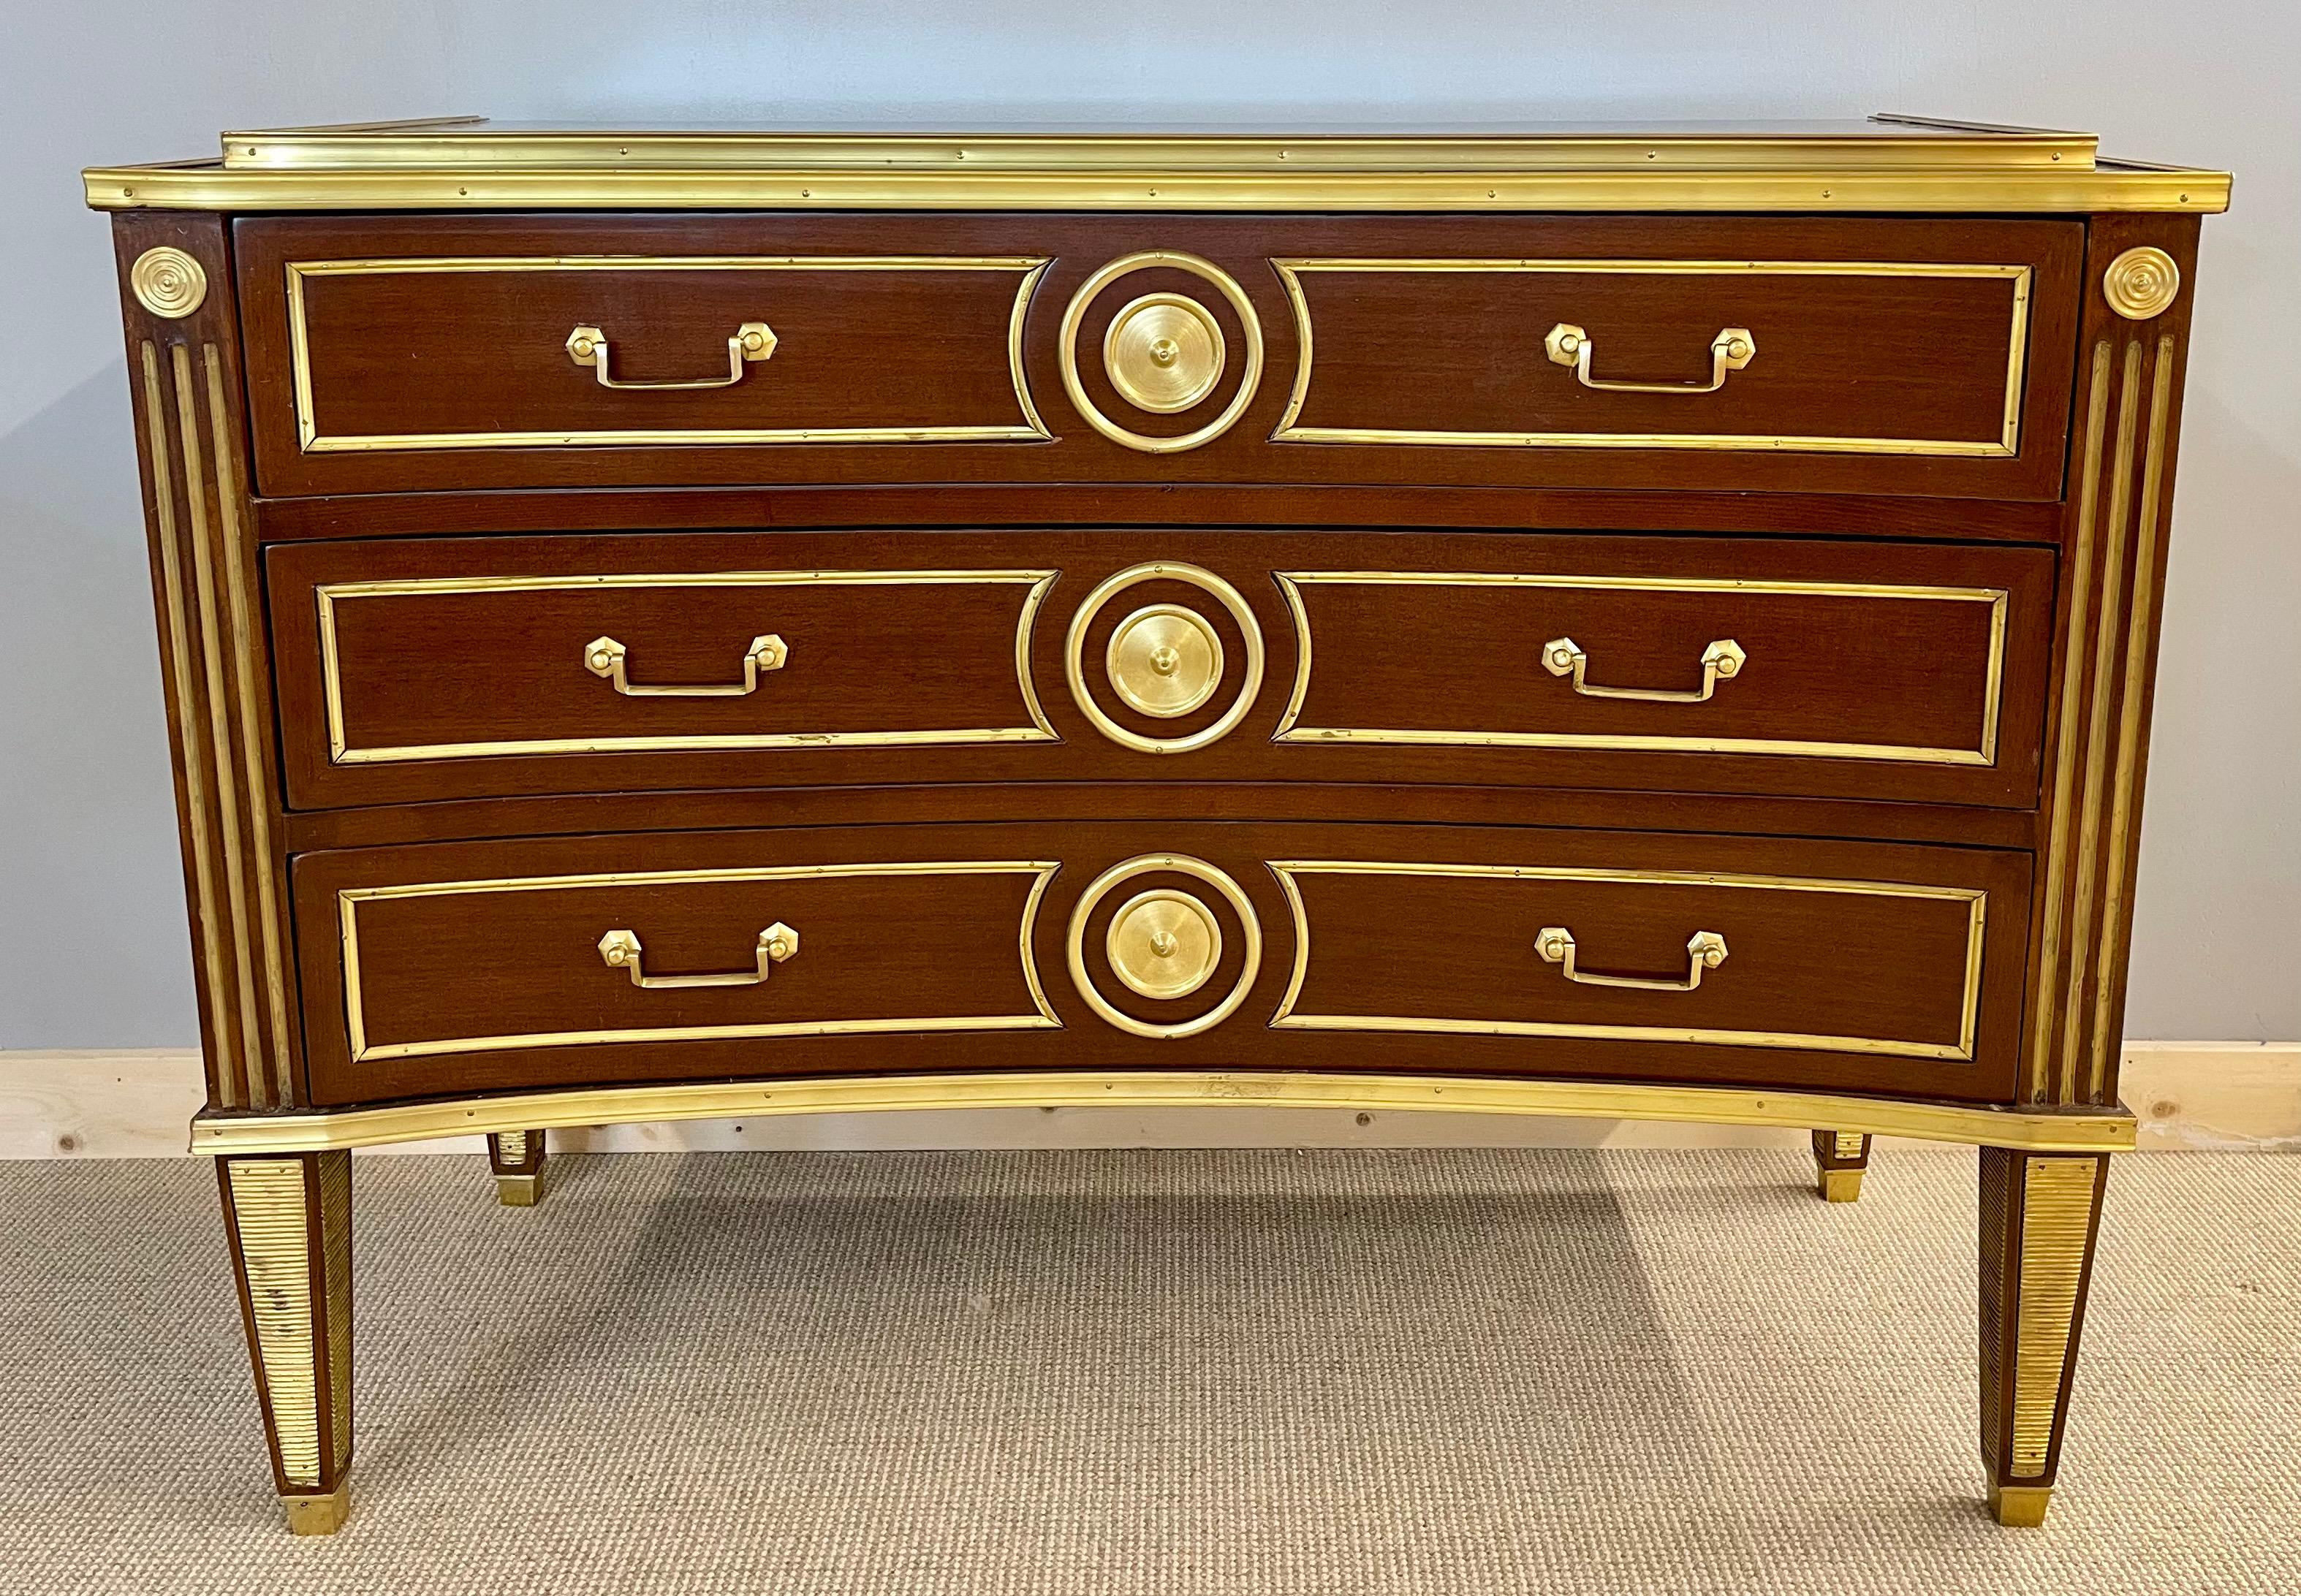 Pair of Russian neoclassical style inverted front commodes or chests. These have to be seen to be believed. One of a kind pair of deep inverted curved front commodes in the Russian neoclassical style having the flair of Maison Jansen. The tapering